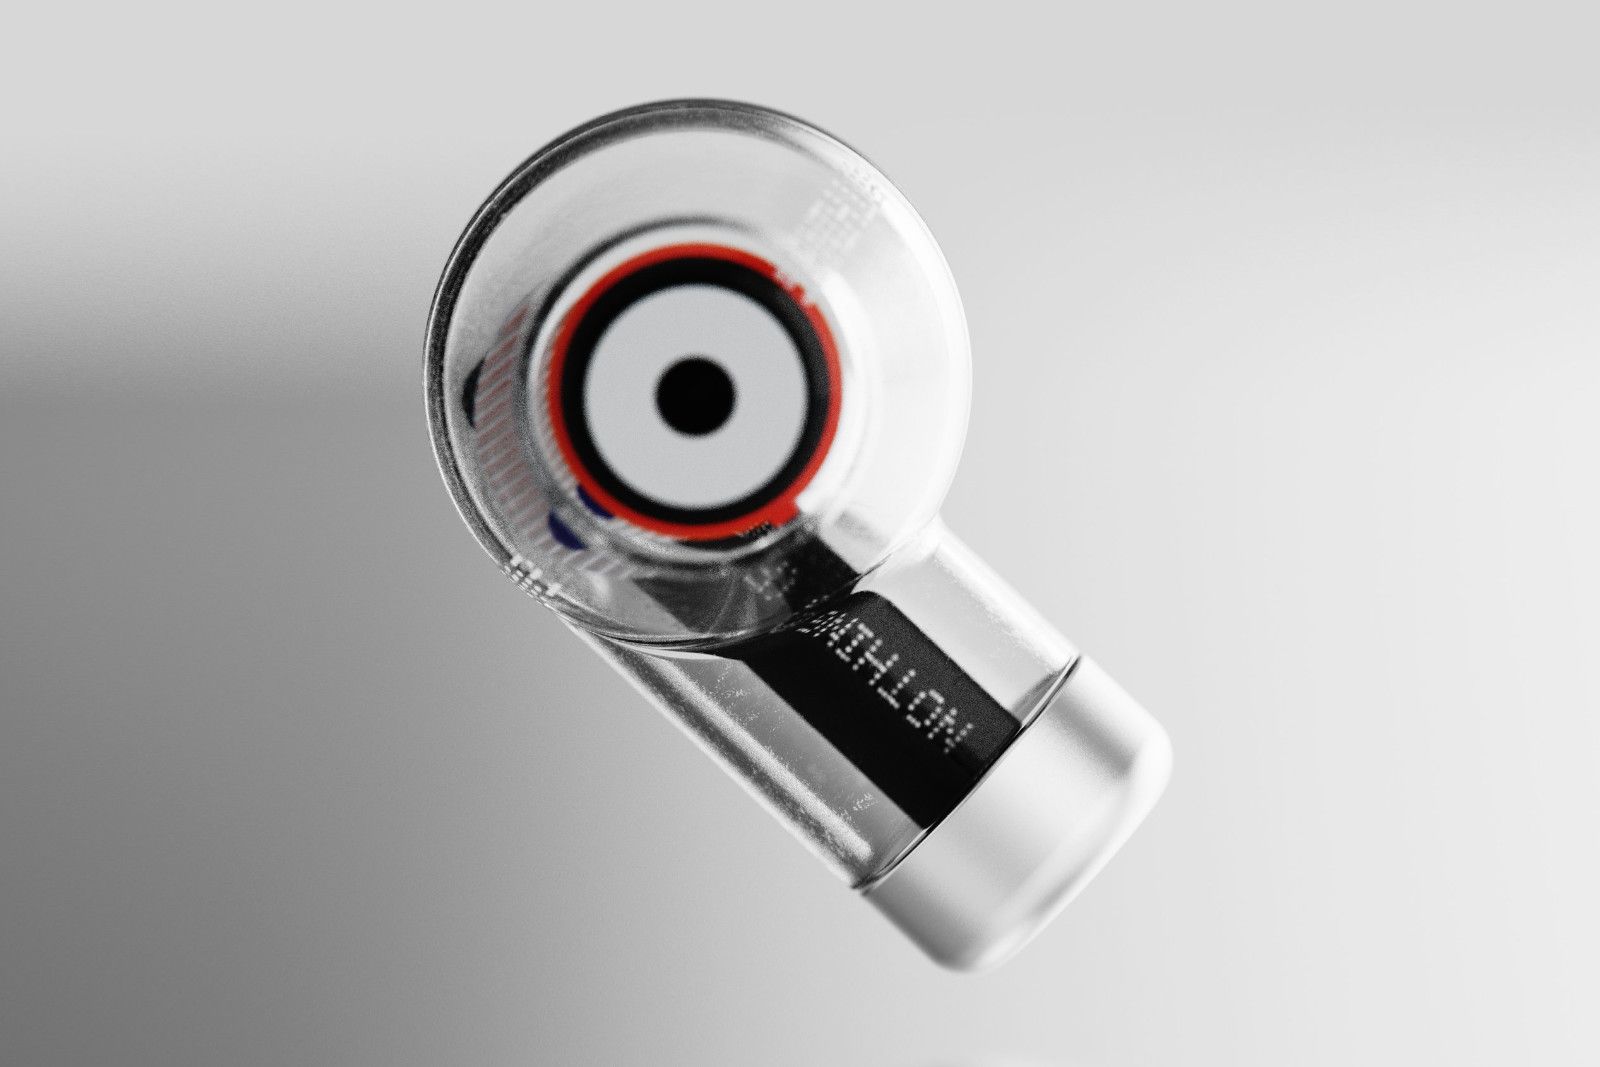 This is what Nothing's first earbud design looks like photo 1